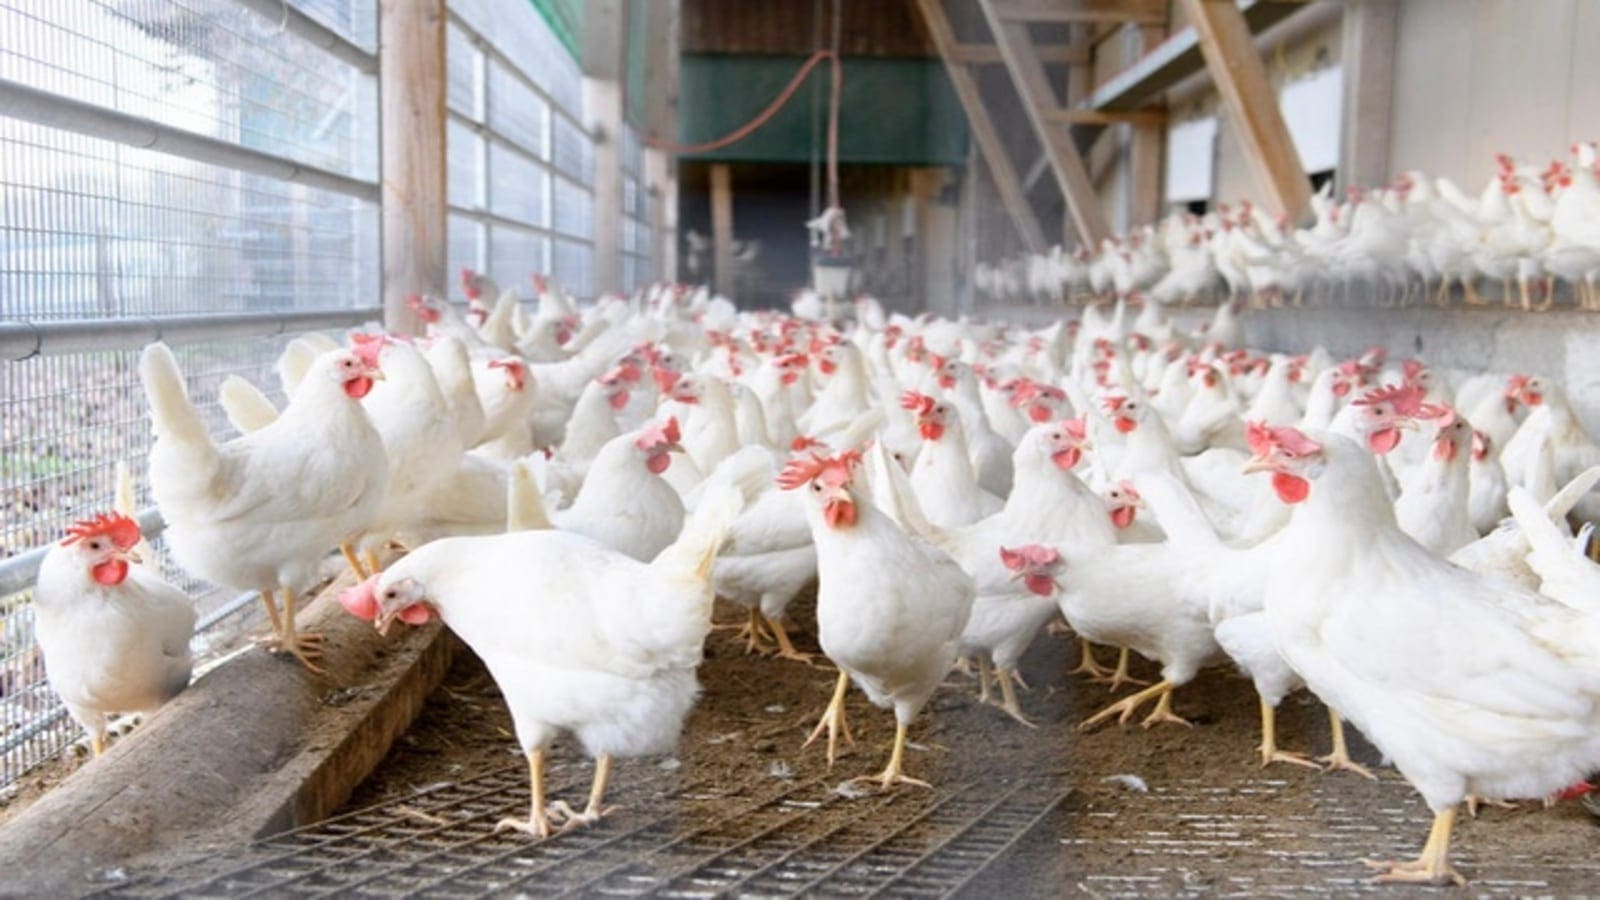 SA agritech startup Omniolytics launches precision poultry farming technology powered by IBM